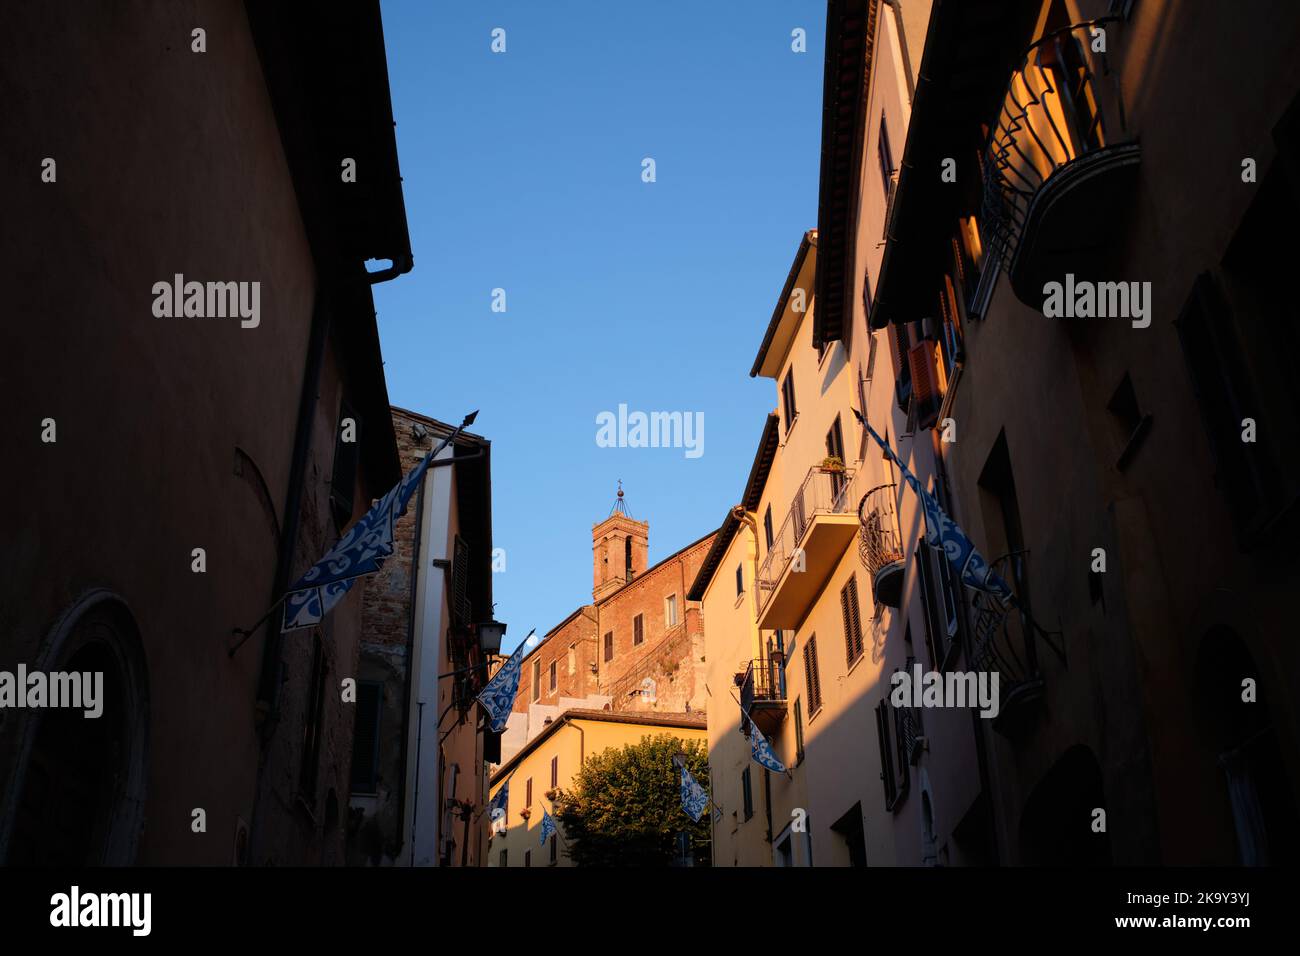 View of the small Italian town of Montepulciano in Tuscany, famous for its wine cellars, photographed at dawn Stock Photo